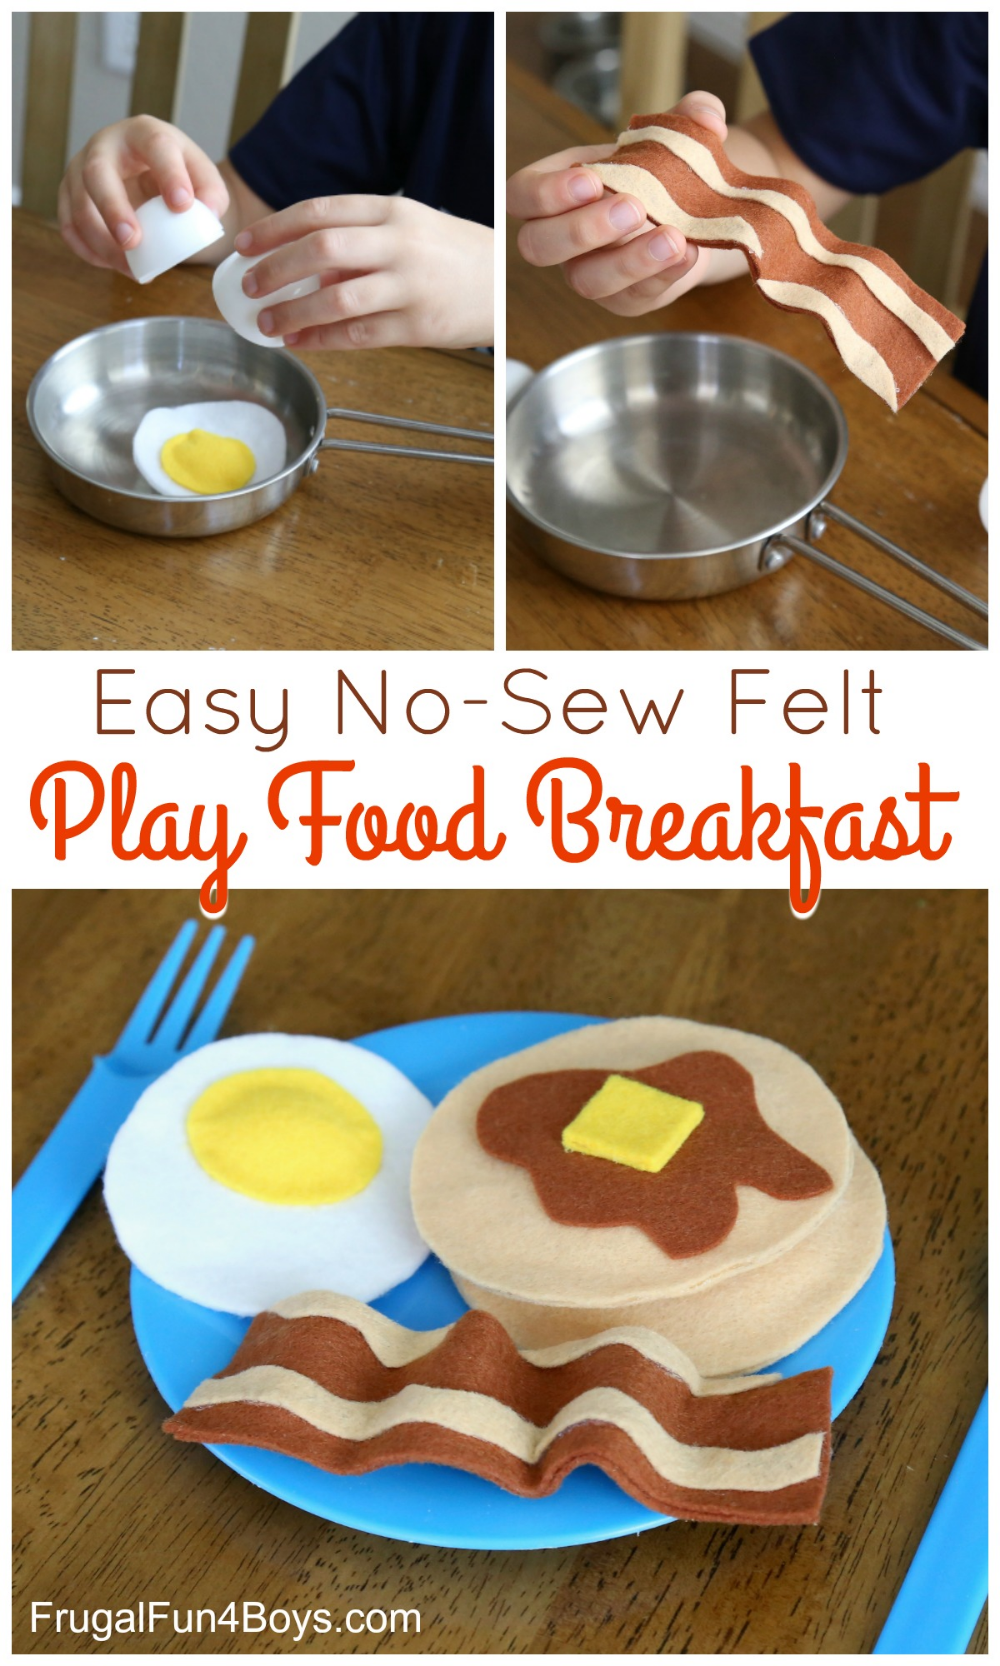 How to Make an ADORABLE No-Sew Felt Breakfast with Pancakes, Eggs, and Bacon - Frugal Fun For Boys and Girls - How to Make an ADORABLE No-Sew Felt Breakfast with Pancakes, Eggs, and Bacon - Frugal Fun For Boys and Girls -   17 diy Food projects ideas